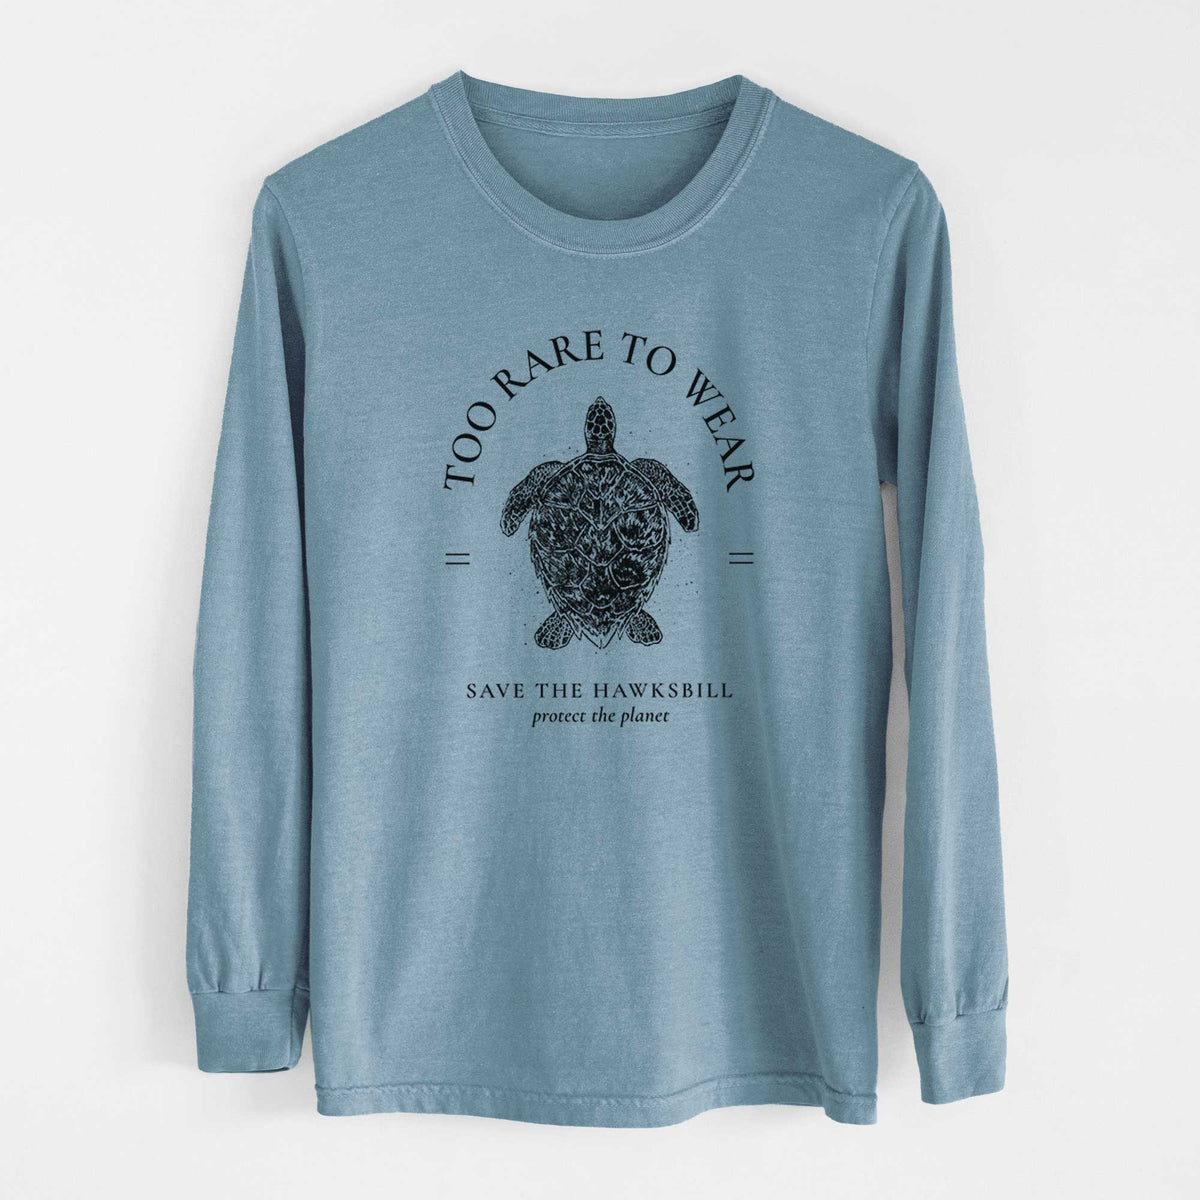 Too Rare to Wear - Save the Hawksbill - Heavyweight 100% Cotton Long Sleeve